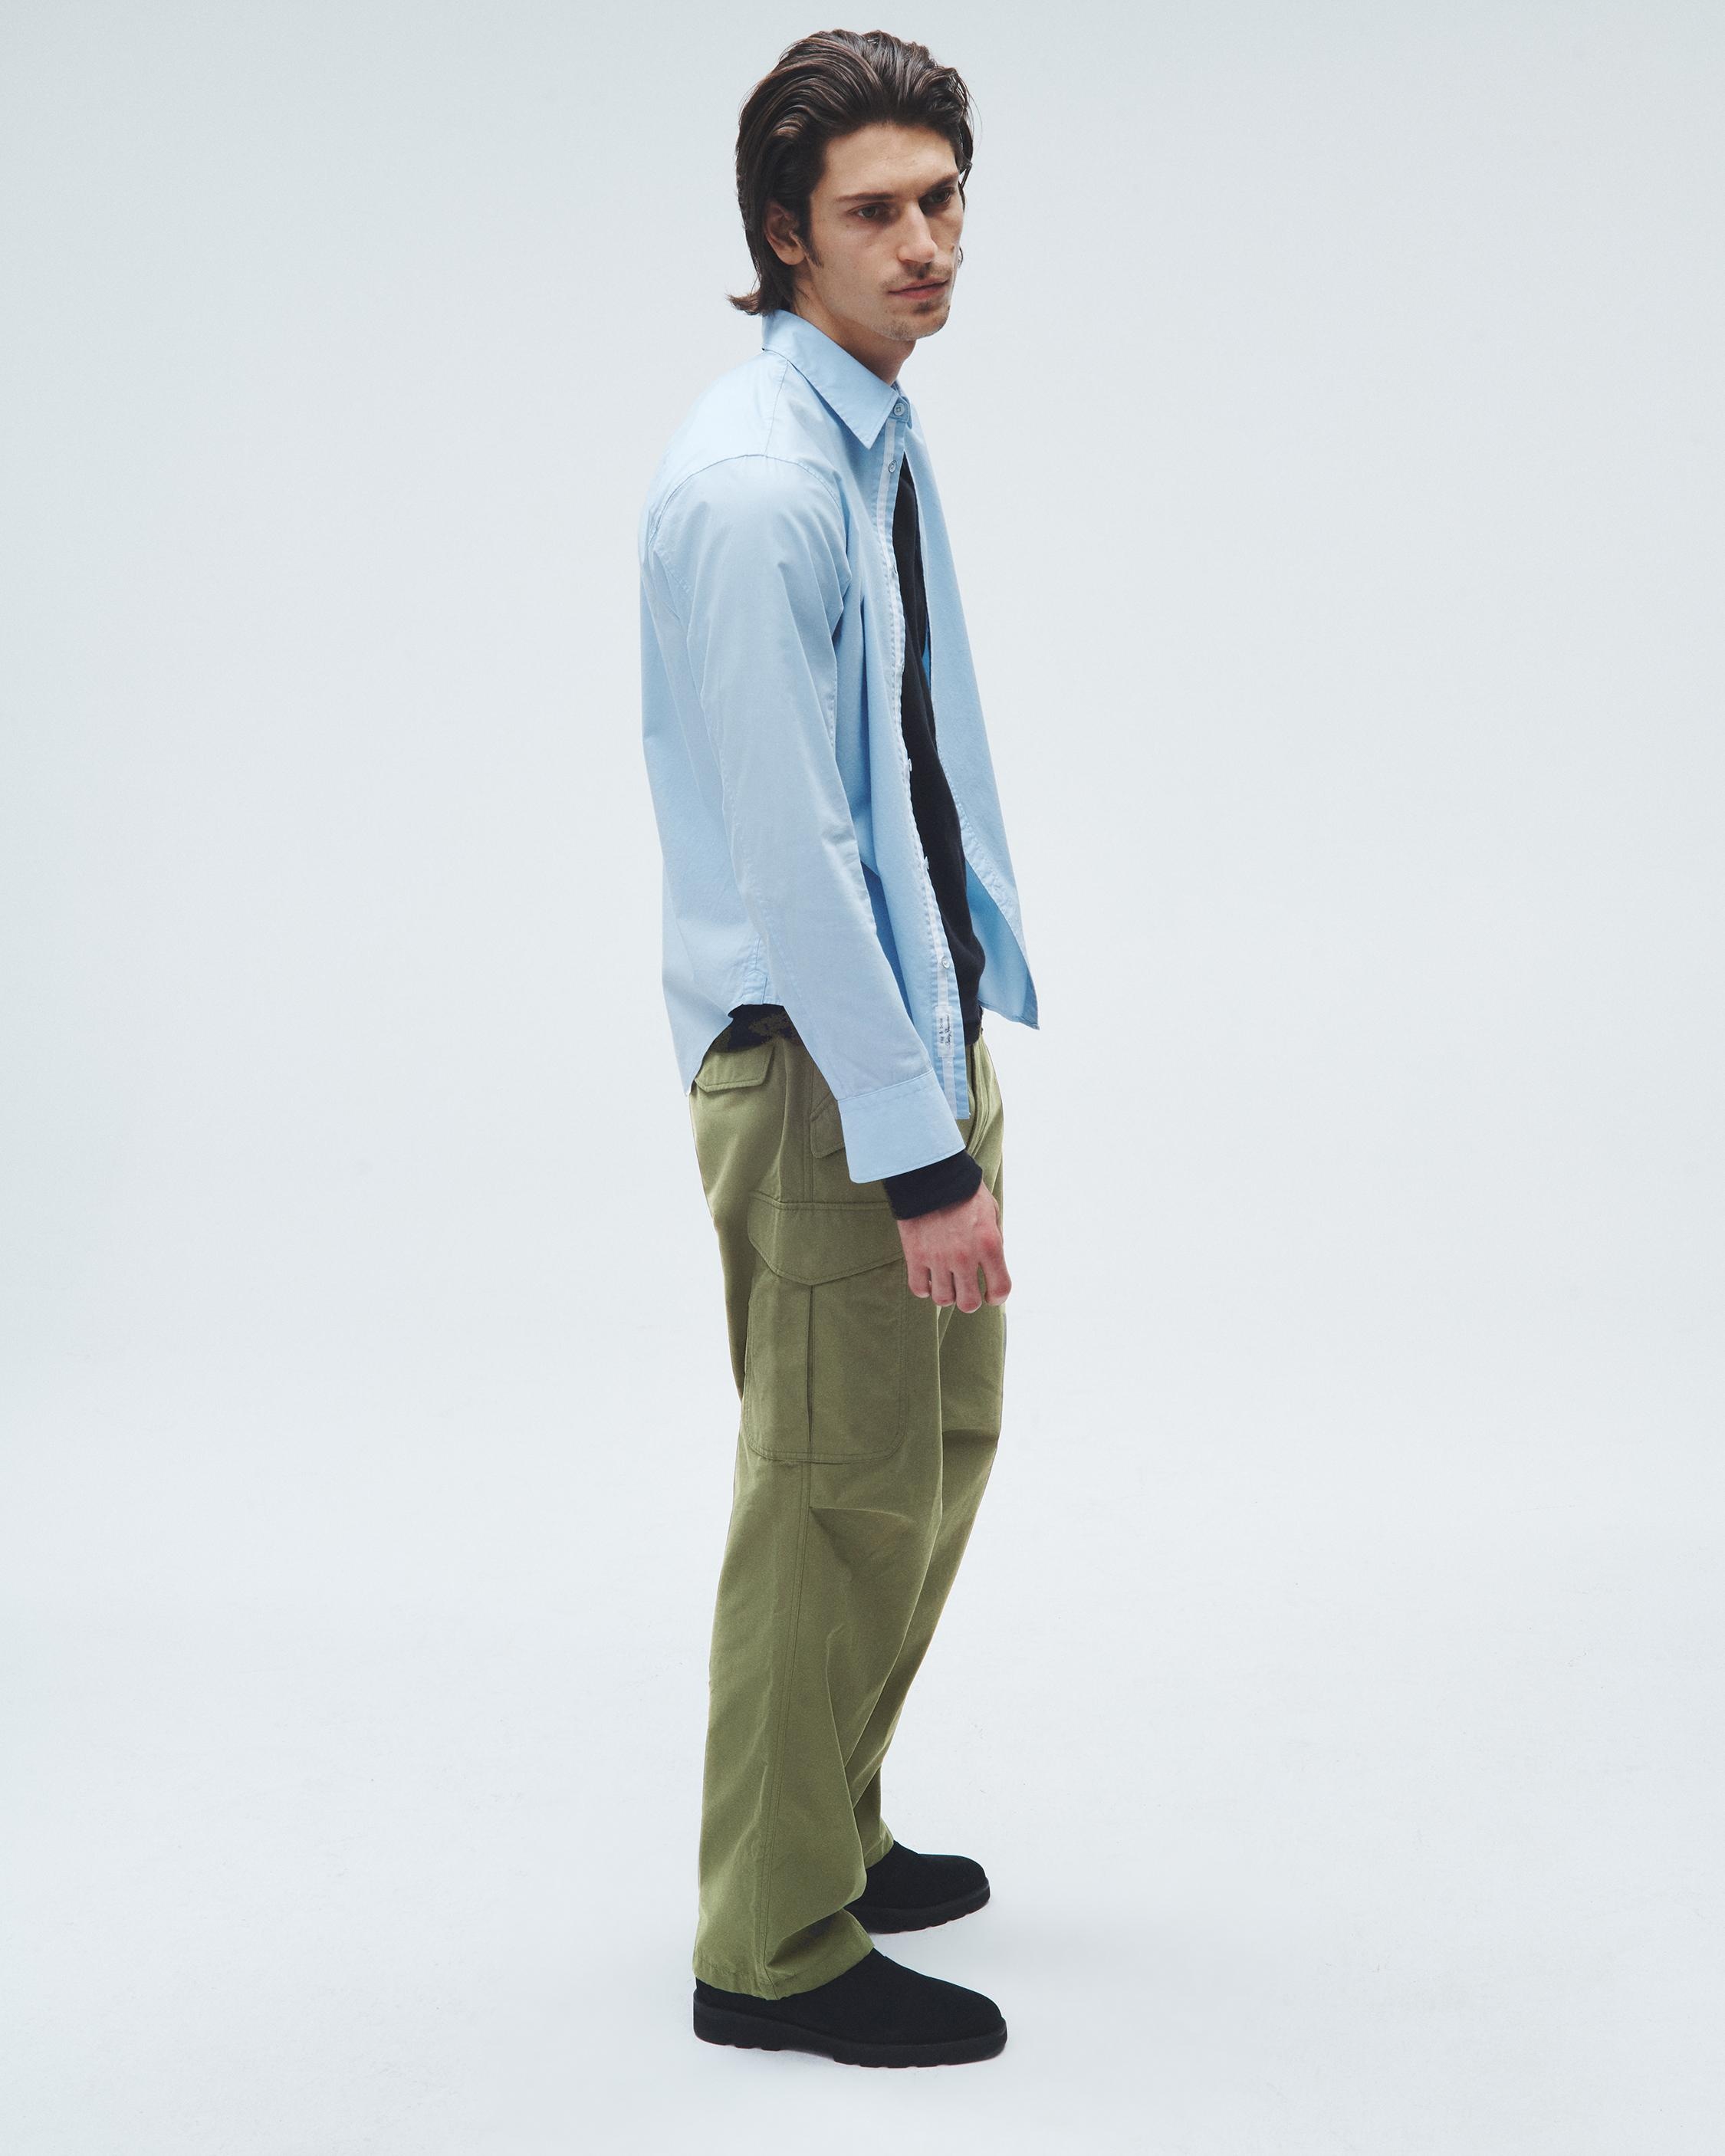 Surplus Nylon Cargo Pant
Relaxed Fit - 3